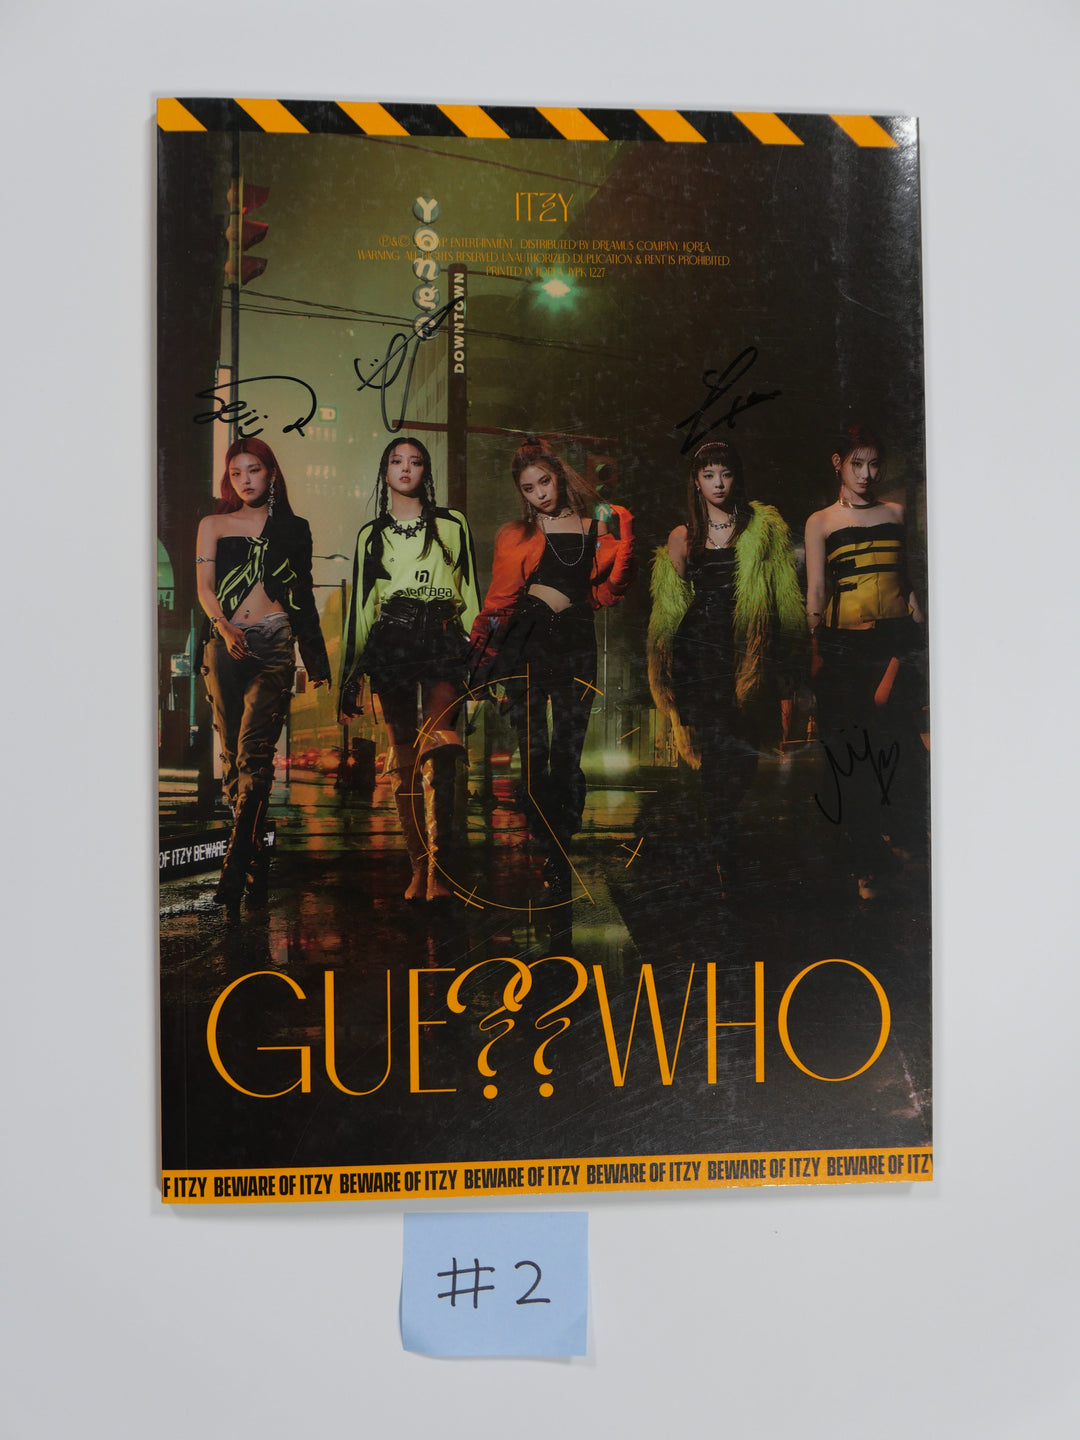 Itzy "Guess Who" - Autographed (Signed) Promo Album